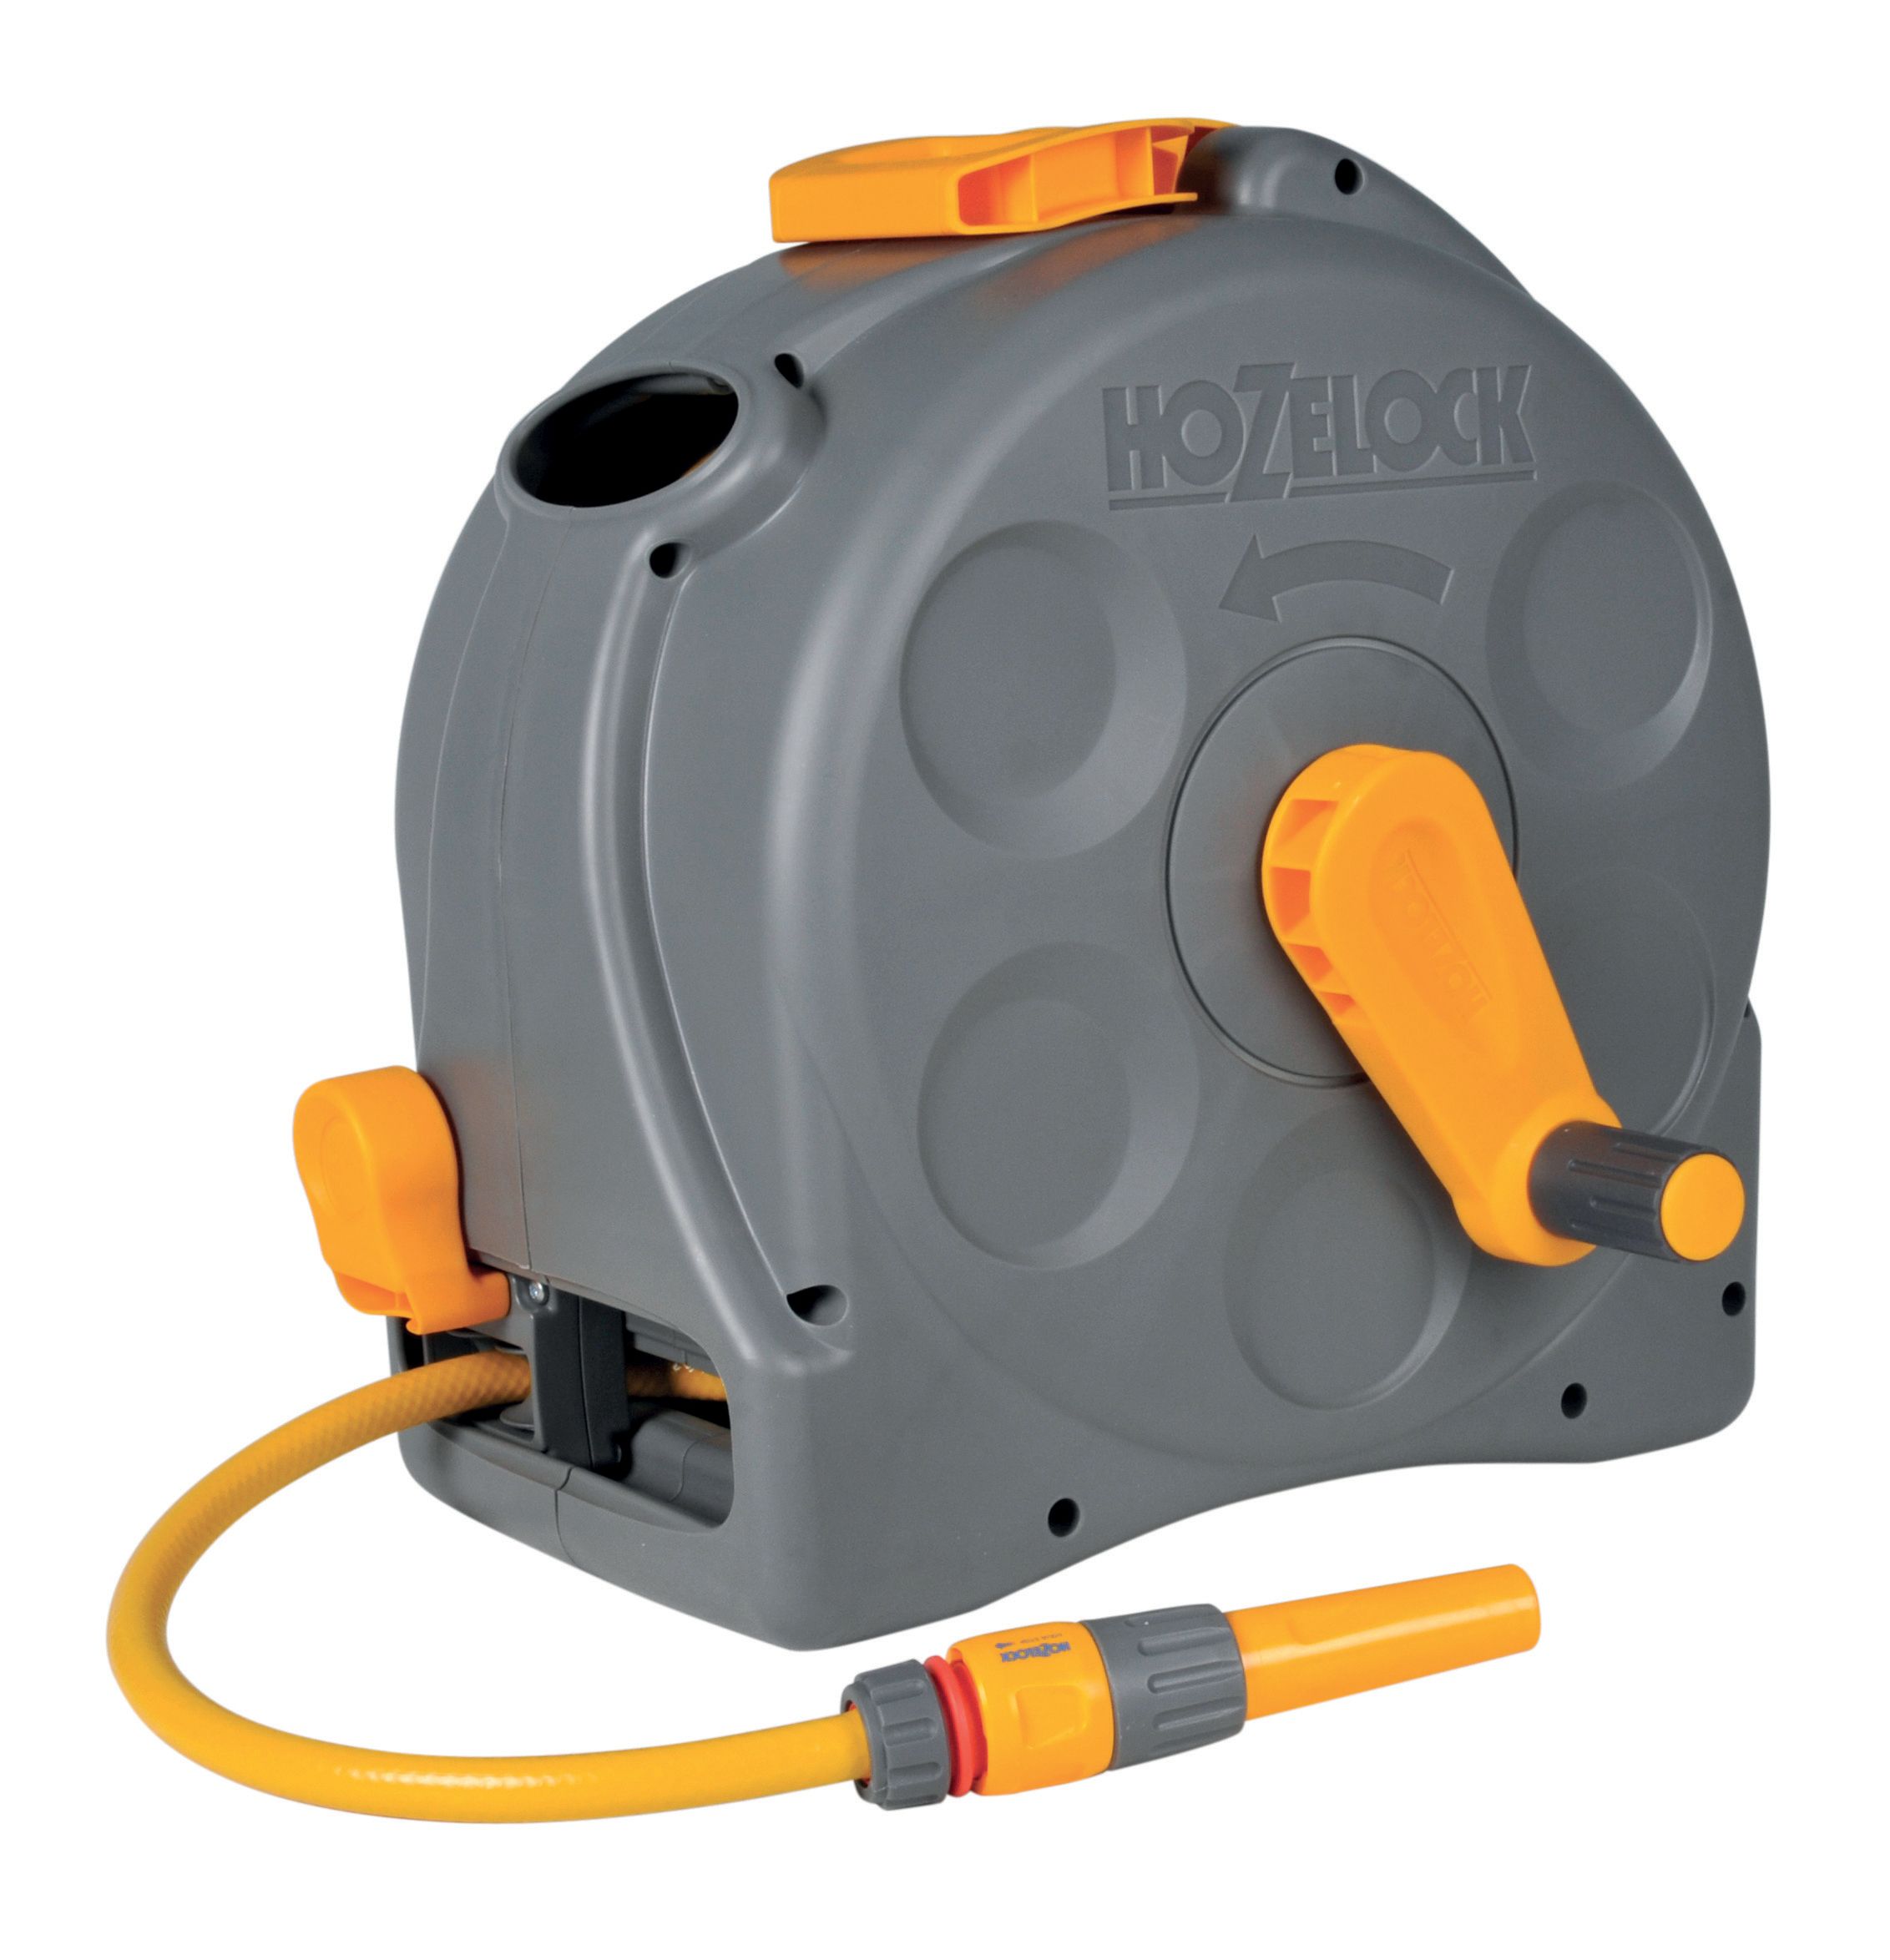 Image of Hozelock 2415 2 in 1 Compact Enclosed Reel with Hose Pipe - 25m